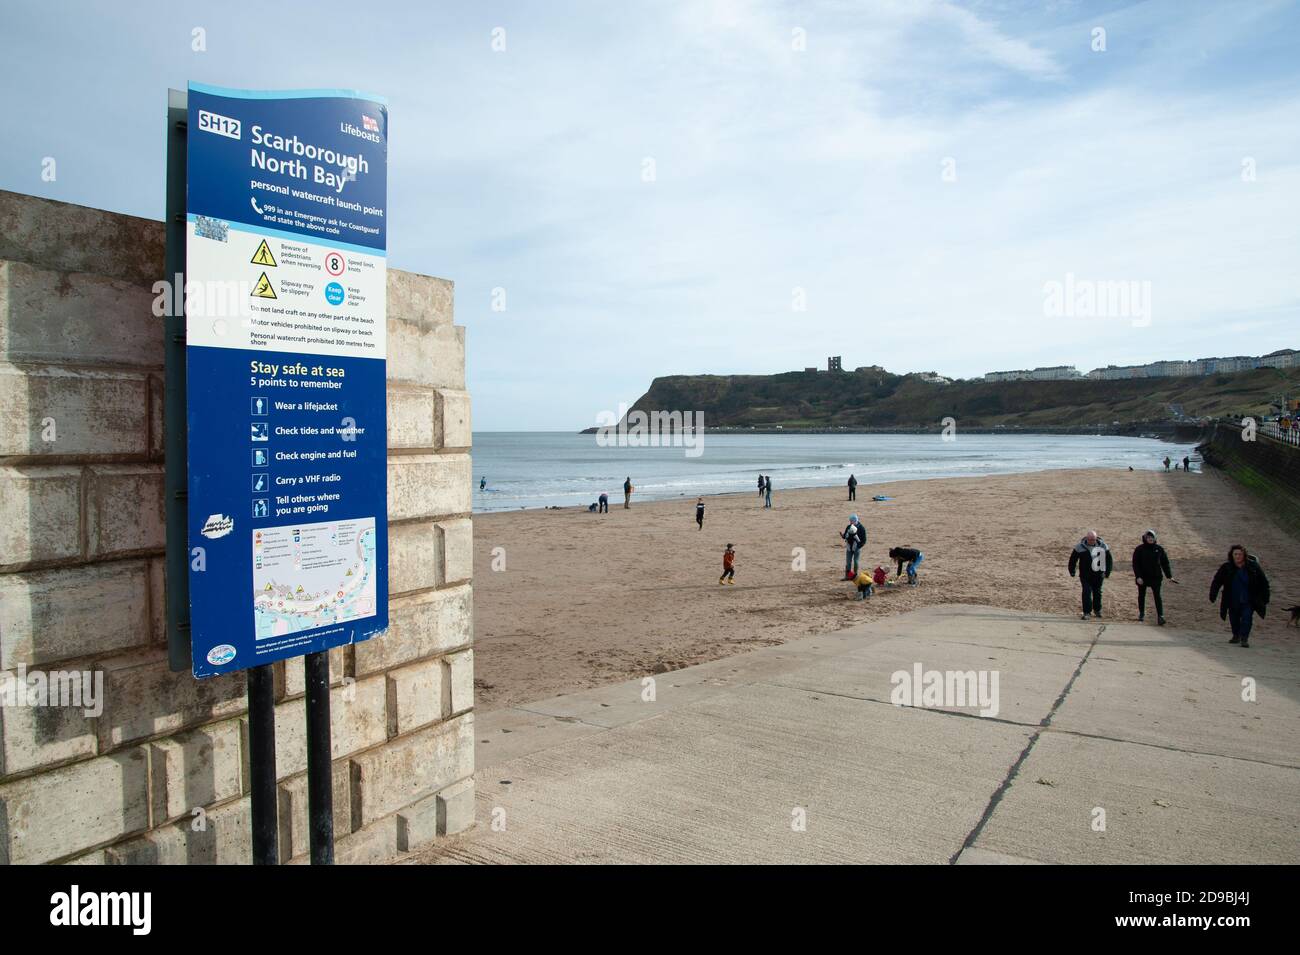 Information sign at the entrance to the beach, Scarborough North Bay, Yorkshire, England Stock Photo